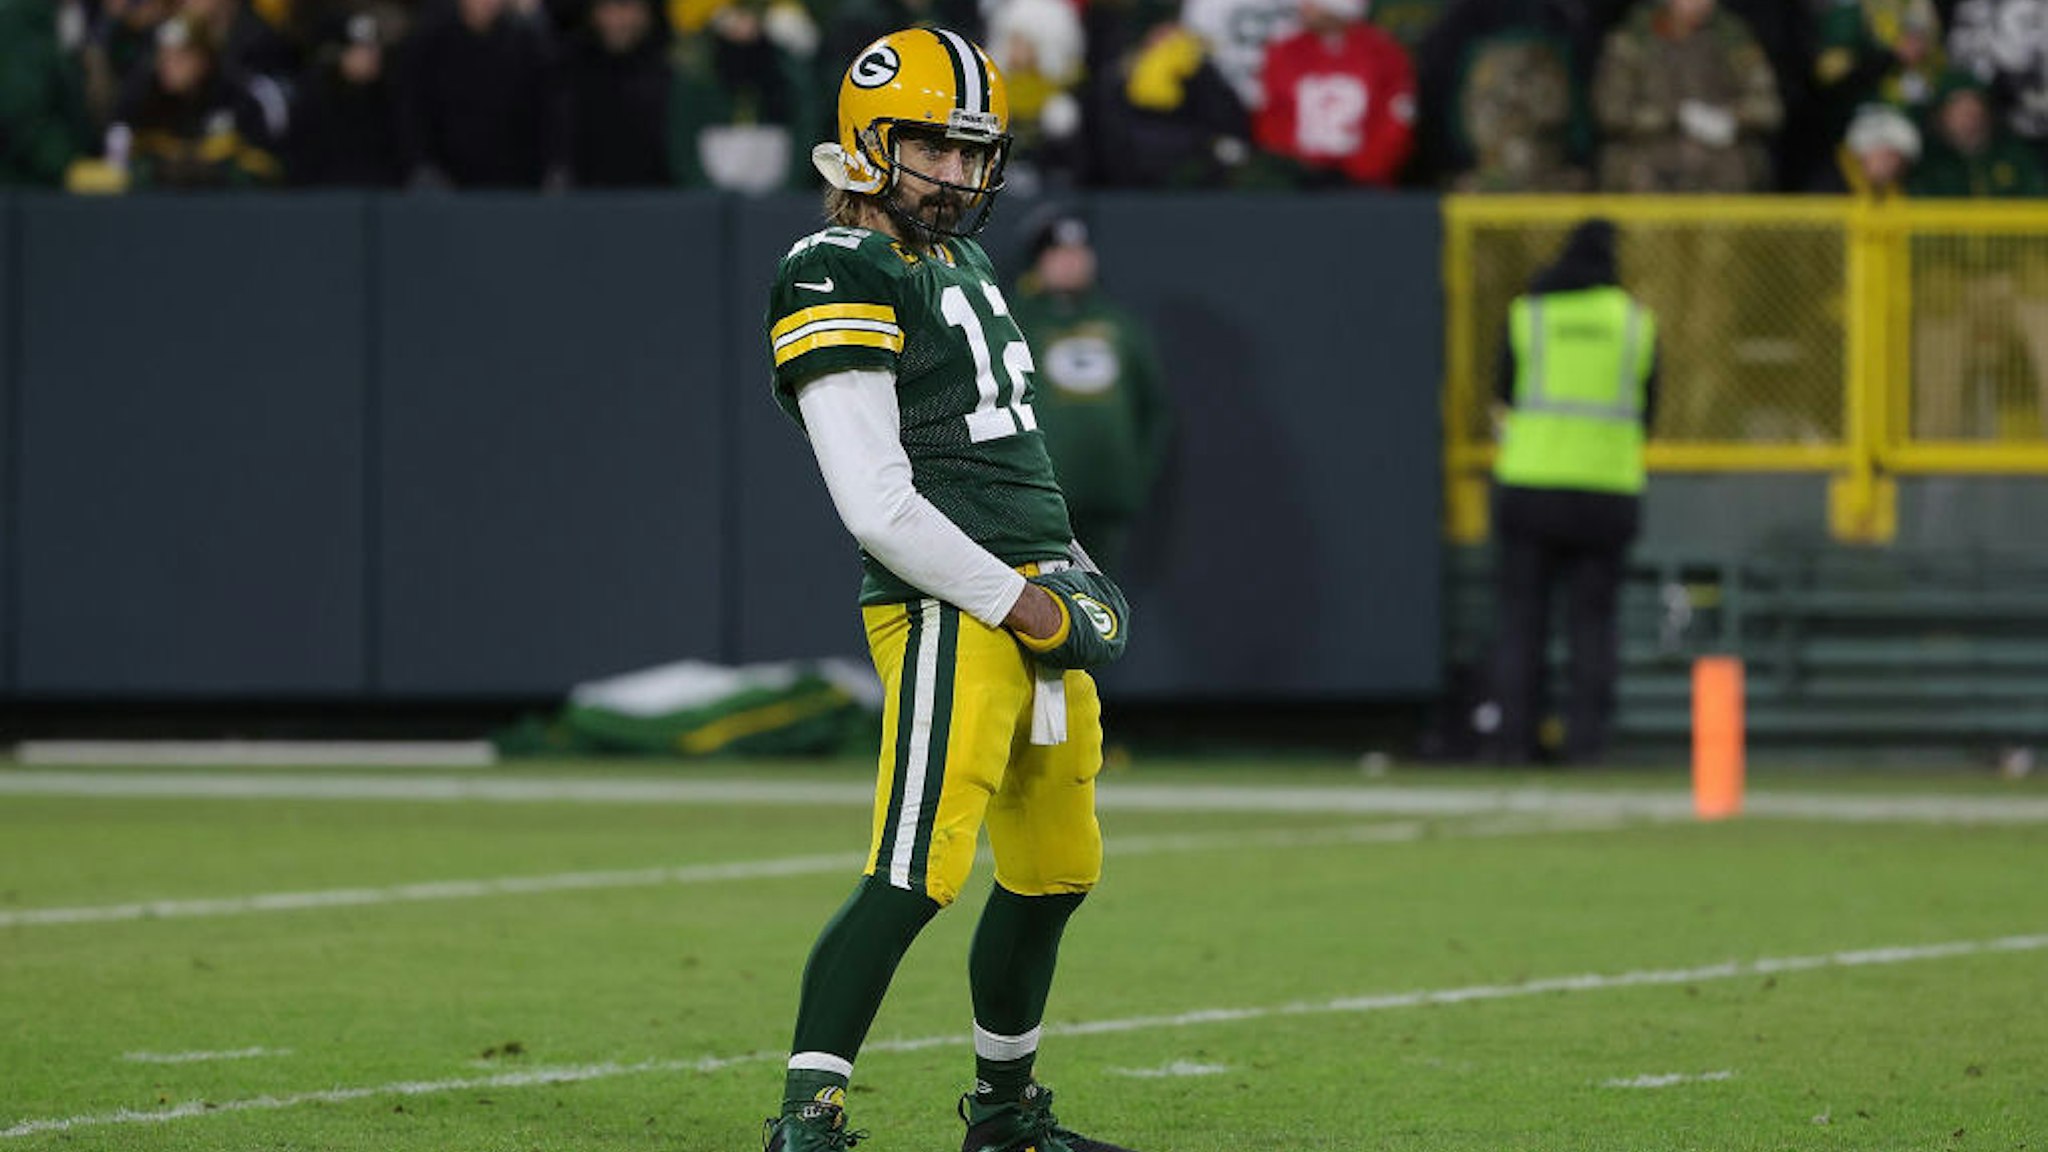 GREEN BAY, WISCONSIN - DECEMBER 25: Aaron Rodgers #12 of the Green Bay Packers waits for a timeout during a game against the Cleveland Browns at Lambeau Field on December 25, 2021 in Green Bay, Wisconsin. The Packers defeated the Browns 24-22. (Photo by Stacy Revere/Getty Images)